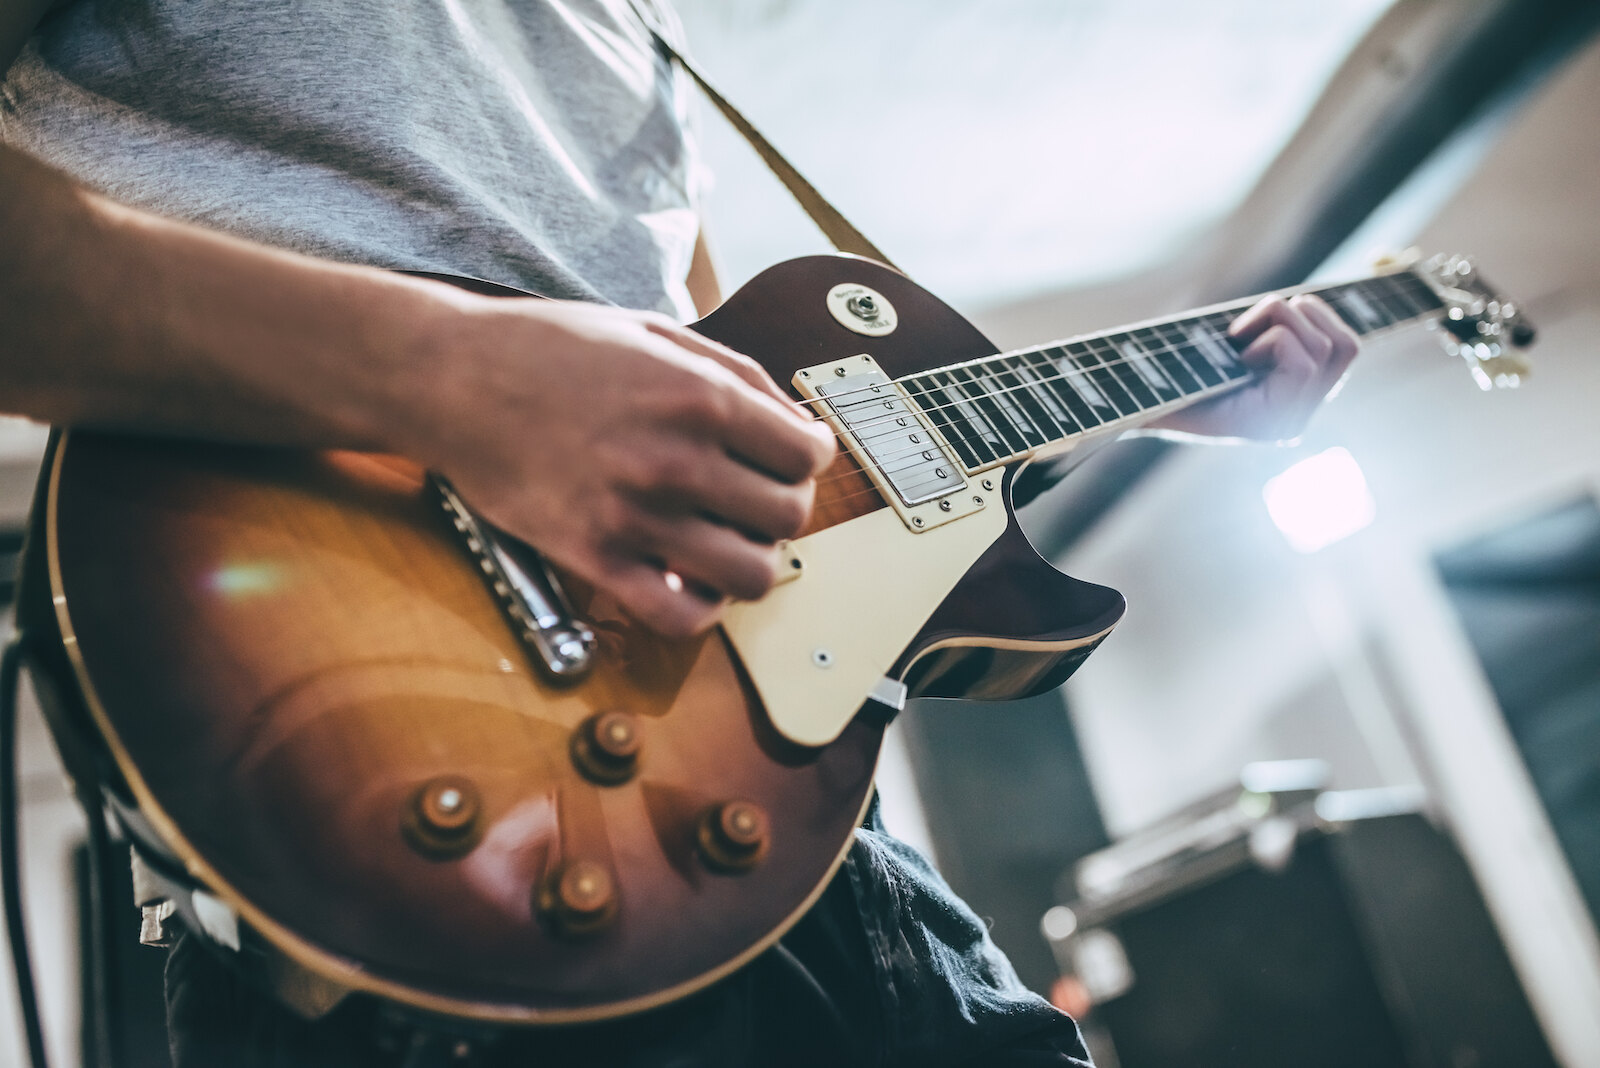 How To Play An Electric Guitar